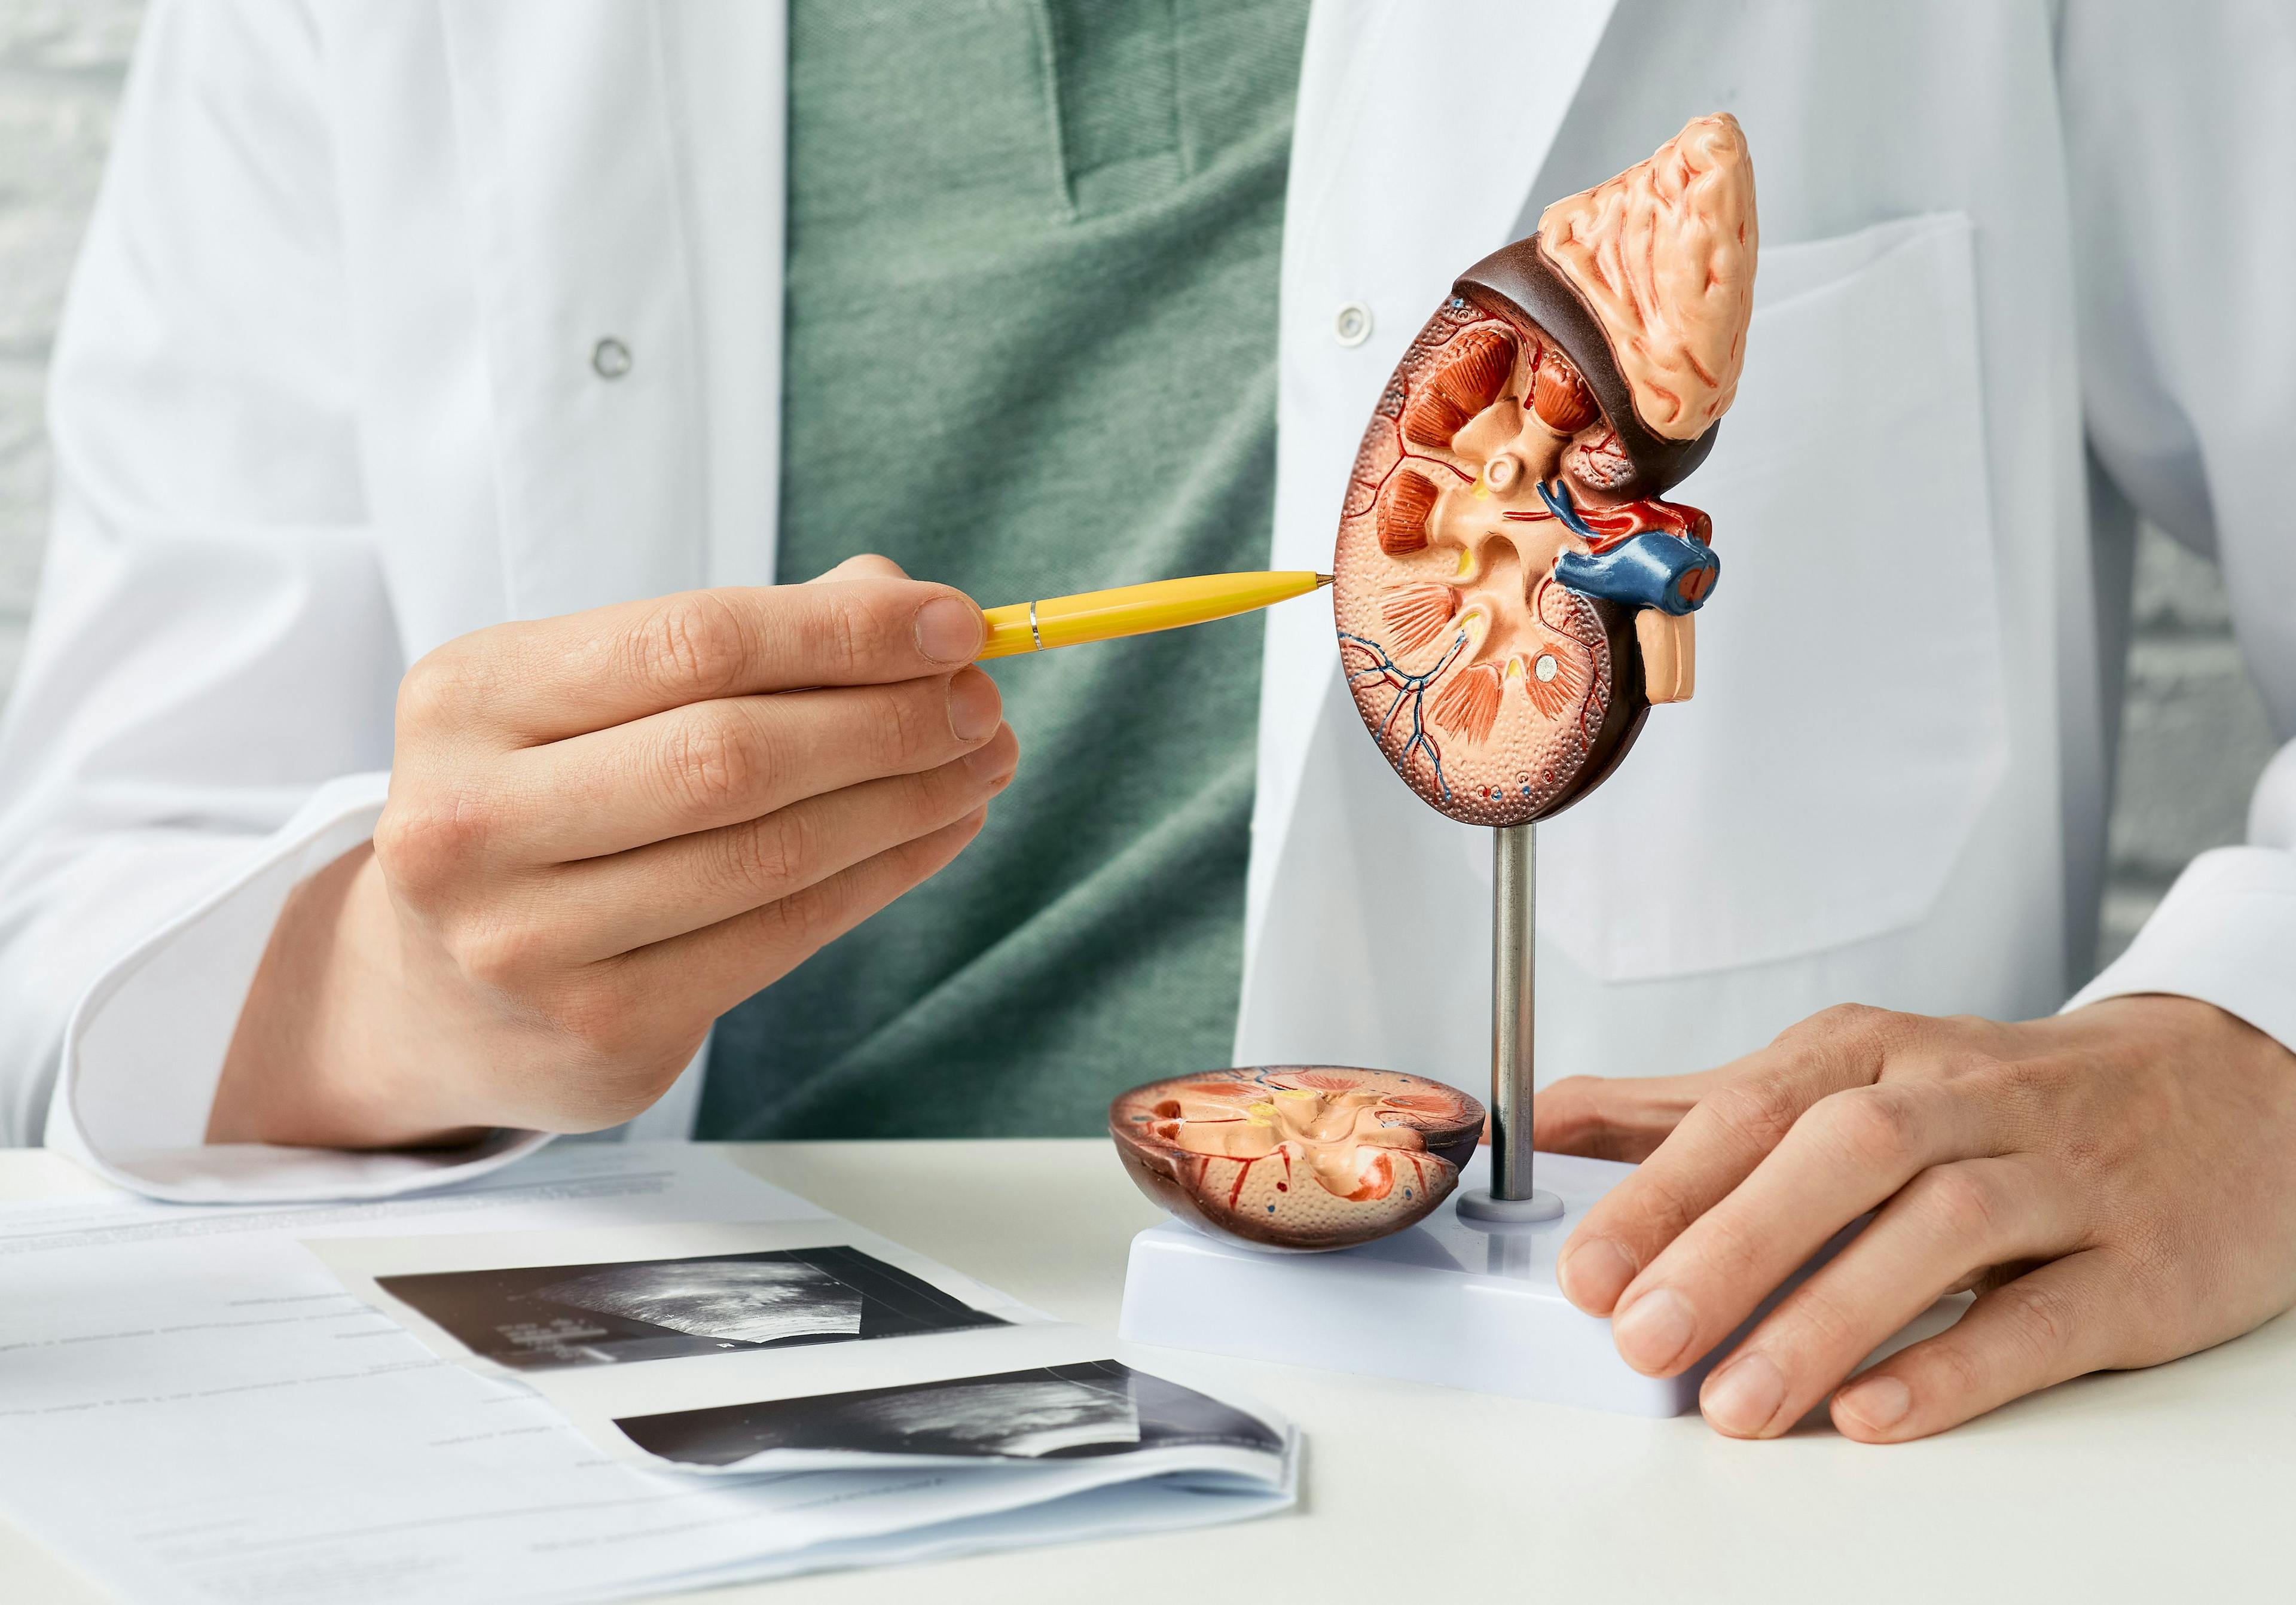 Physician pointing to a kidney model